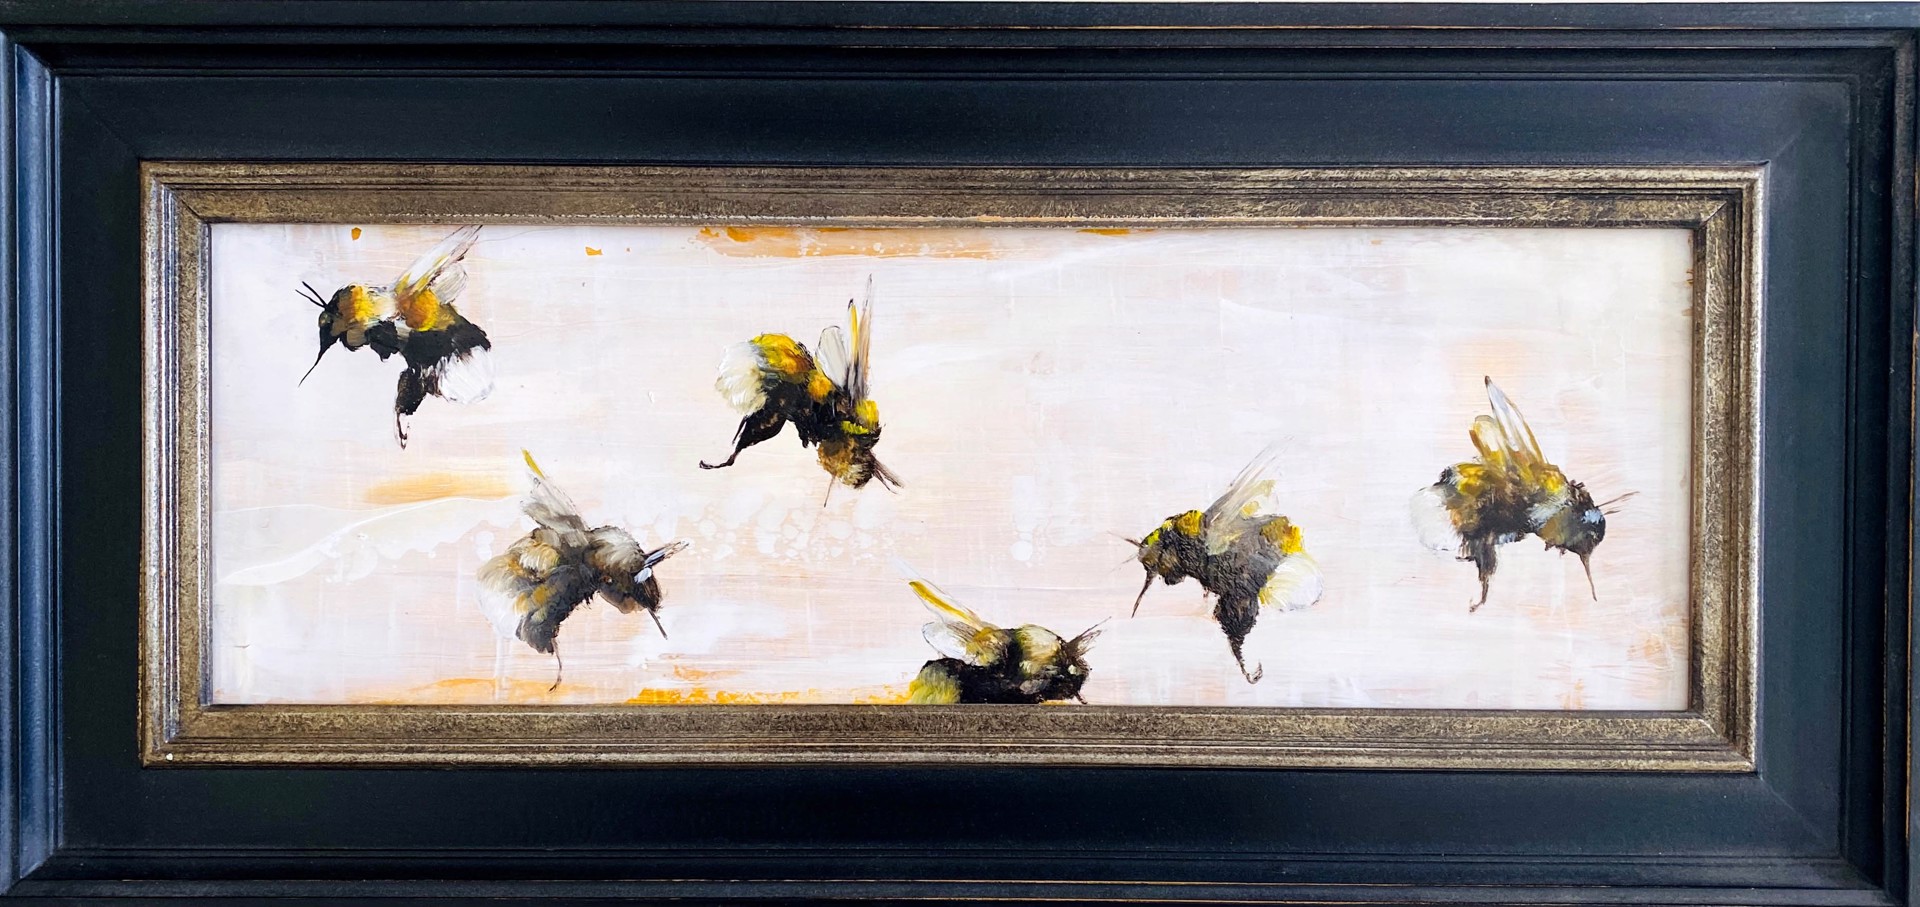 Original Oil Painting In Black Frame Featuring Swarm Of Yellow Bumble Bees On Peach Background